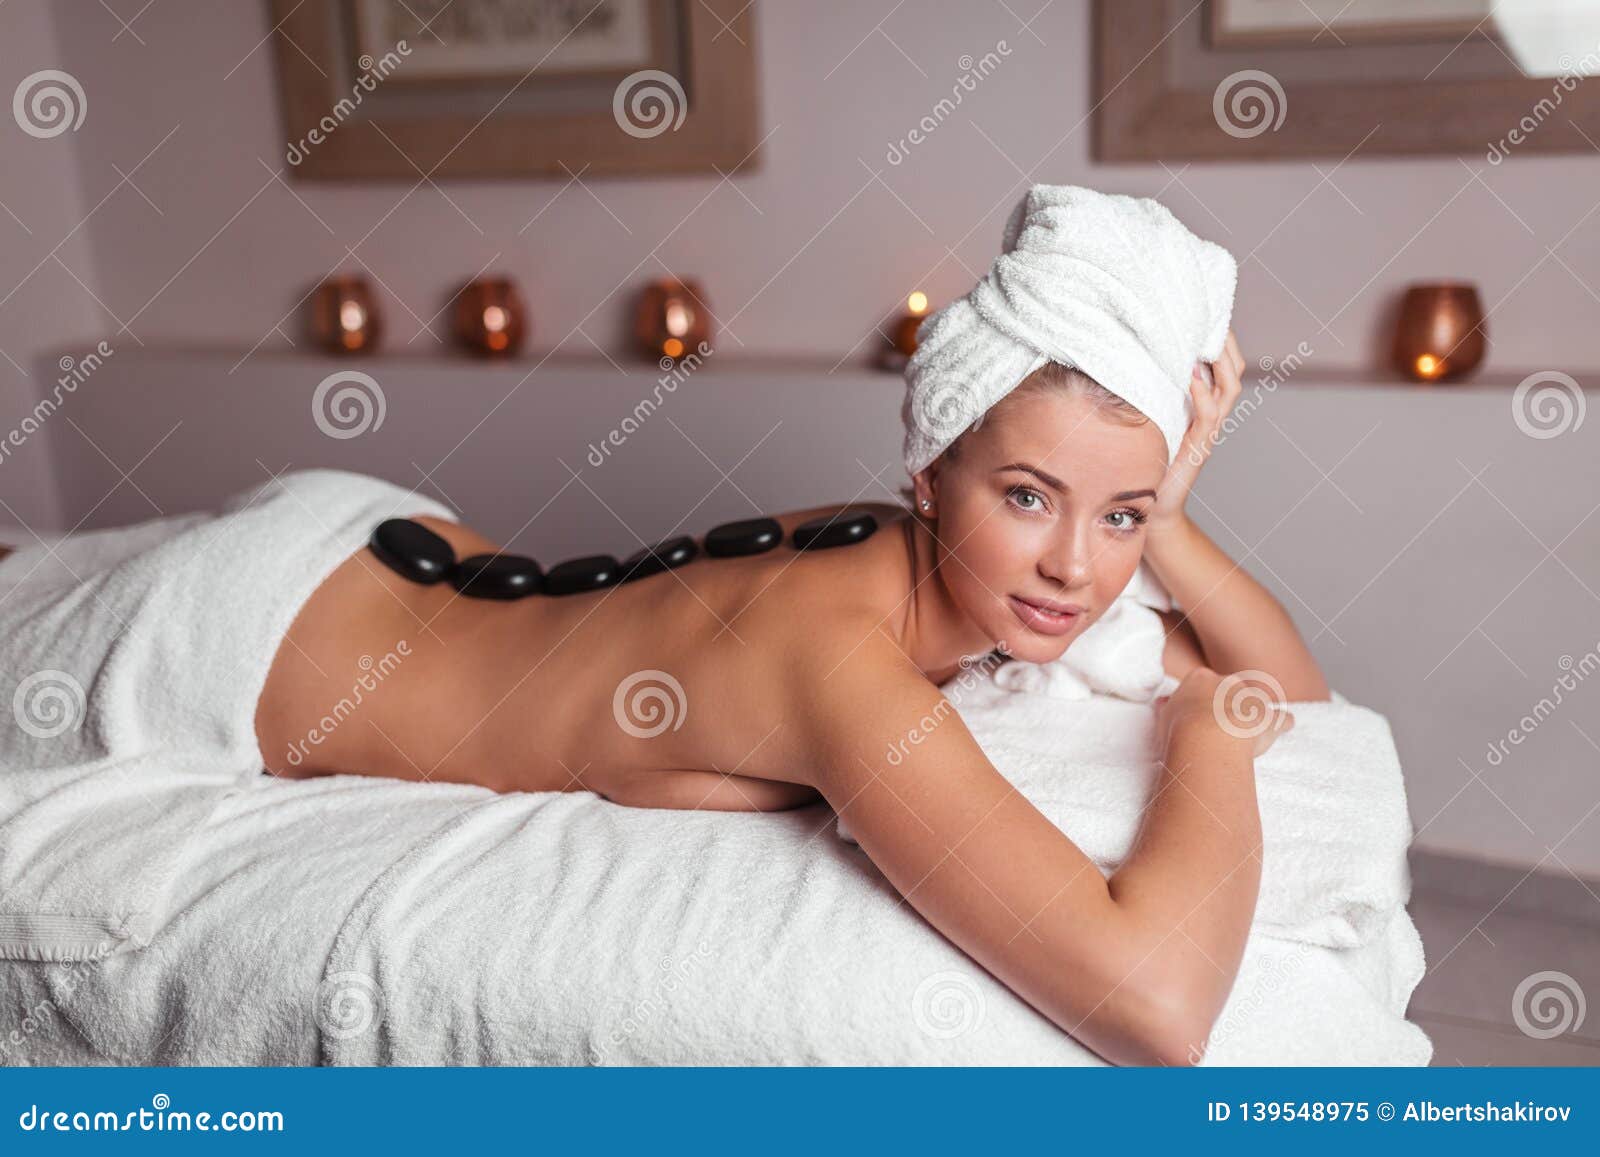 Girl naked on a massage bed